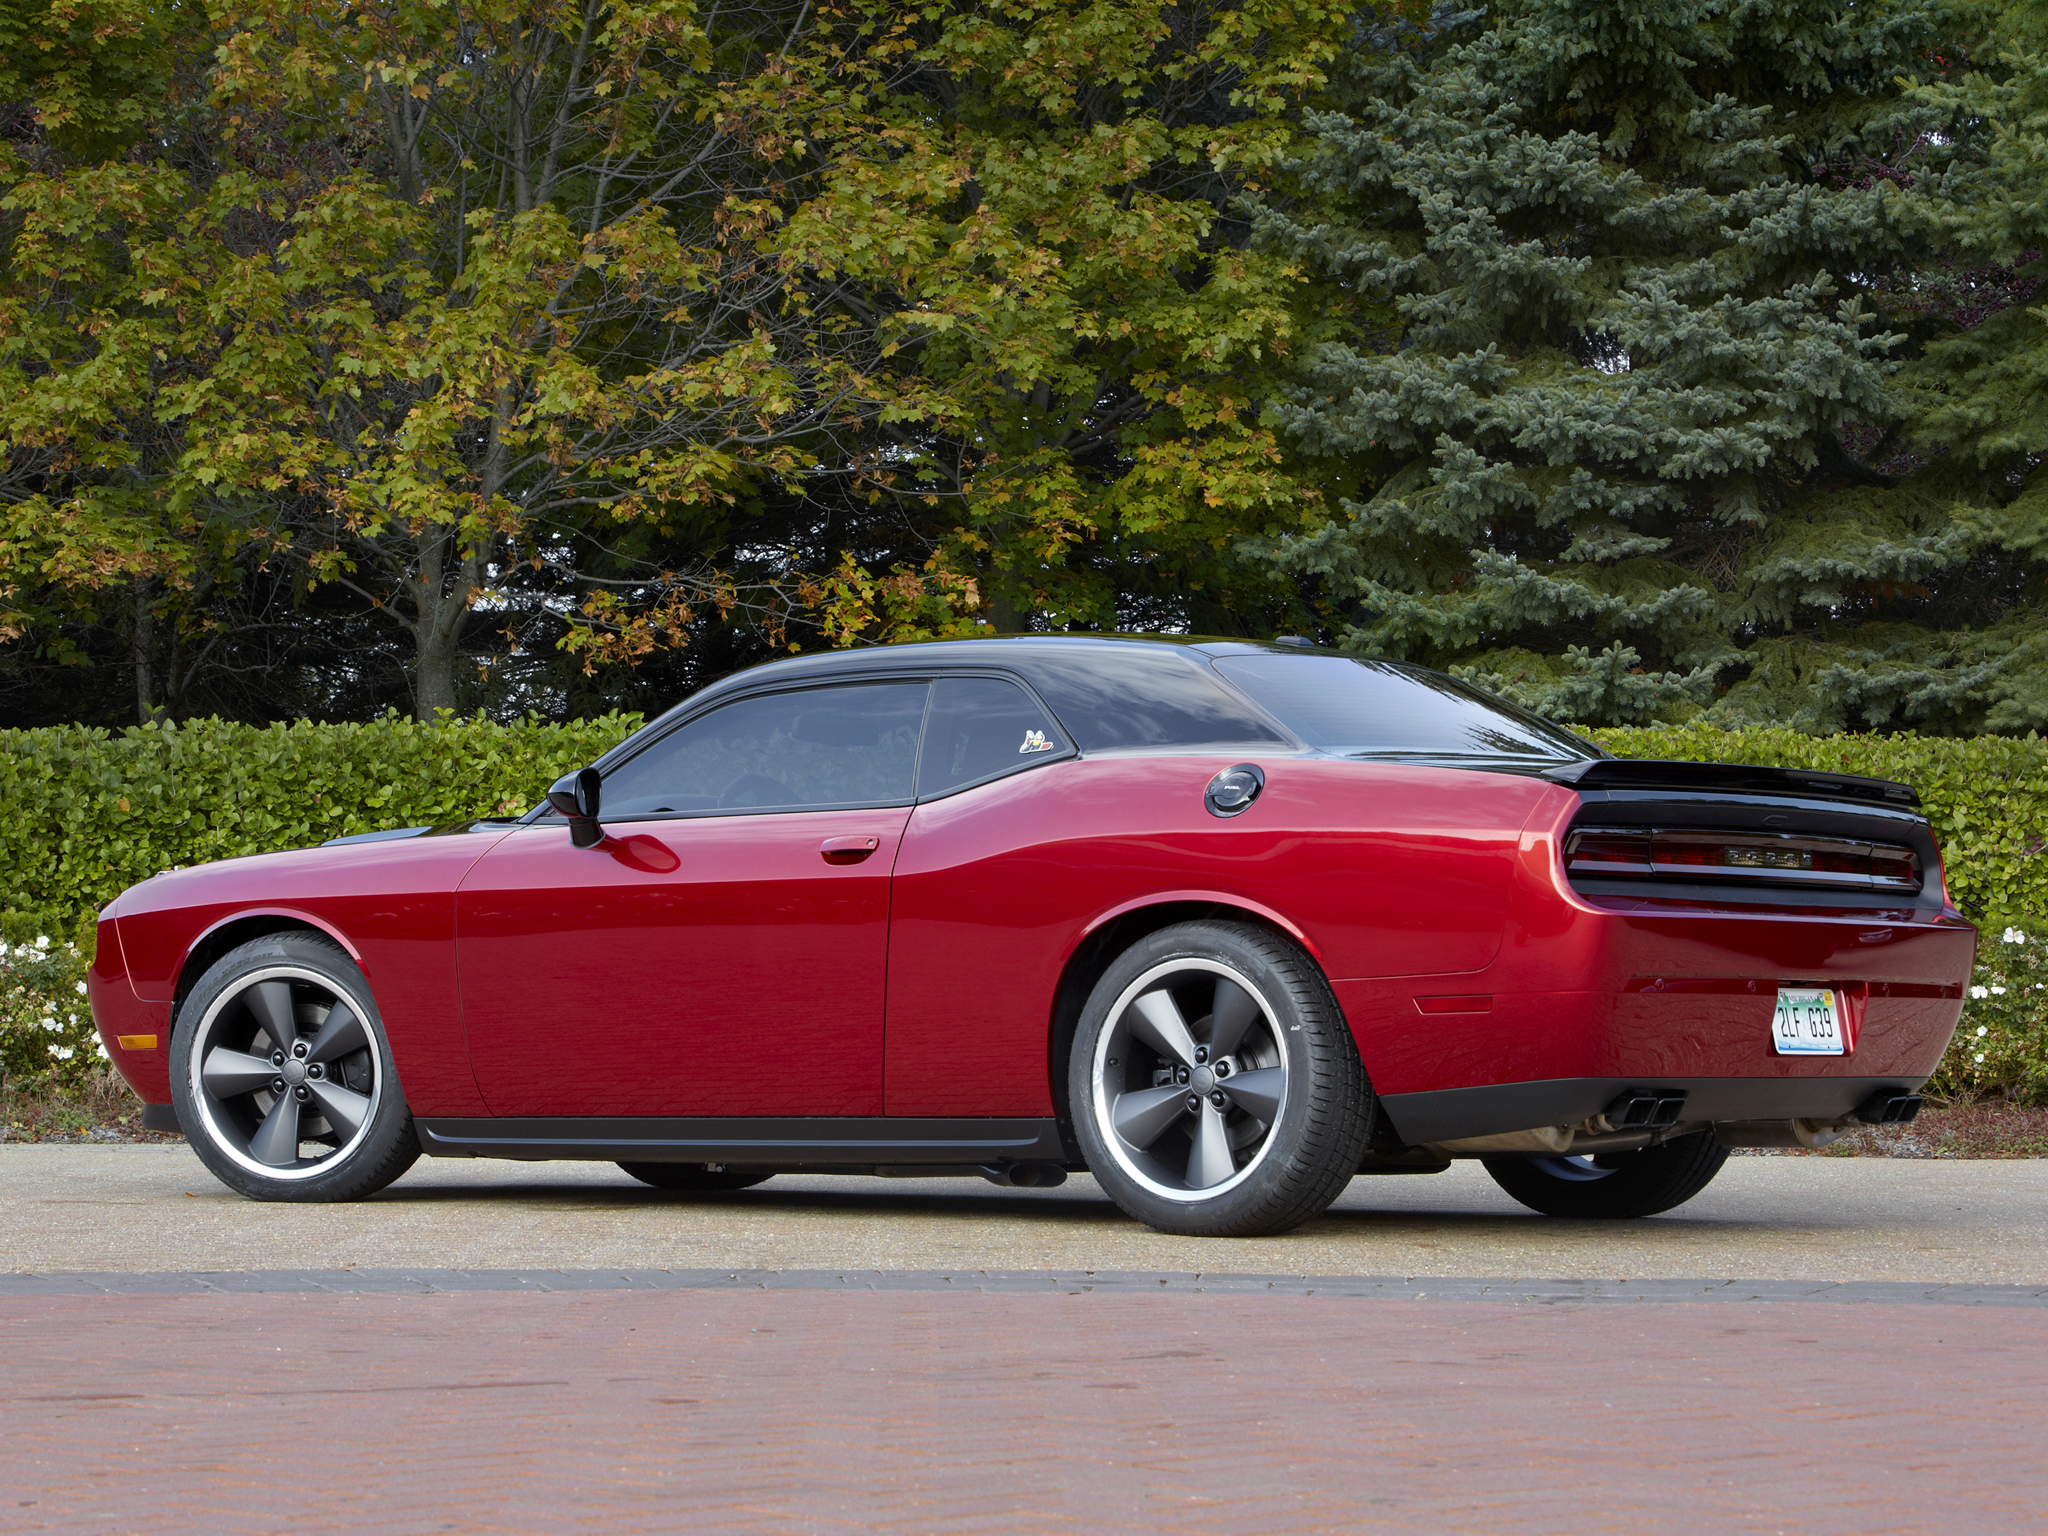 2014, Dodge, Challenger, R t, Scat package 3, Muscle, Tuning Wallpaper